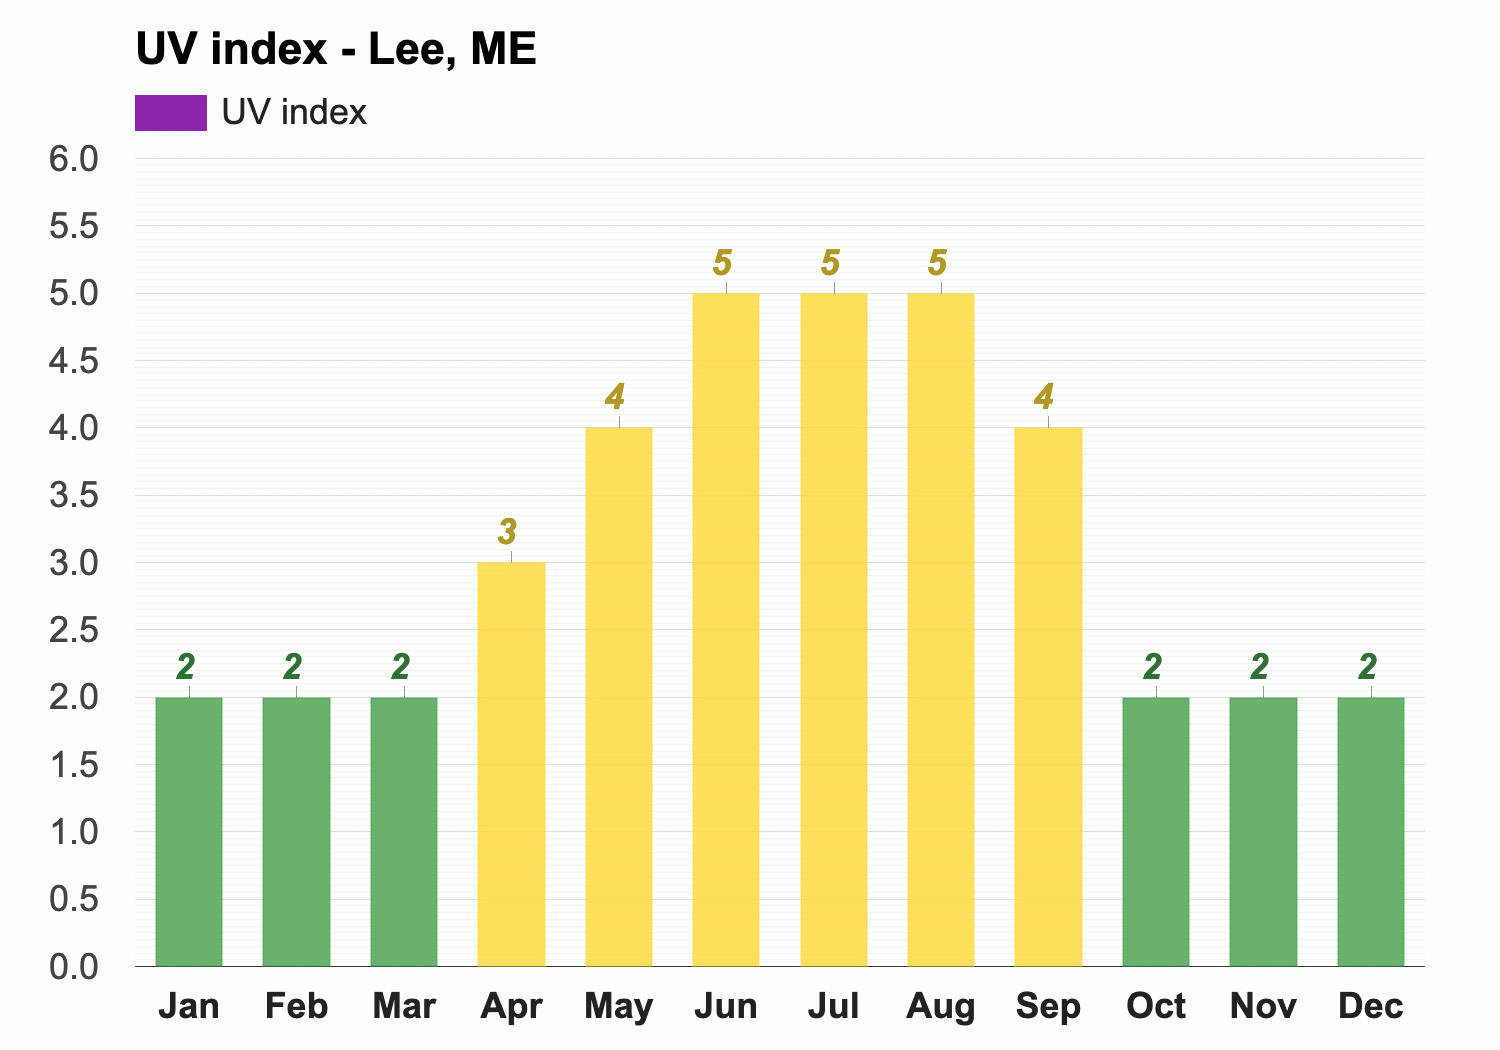 Lee, ME - Climate & Monthly weather forecast